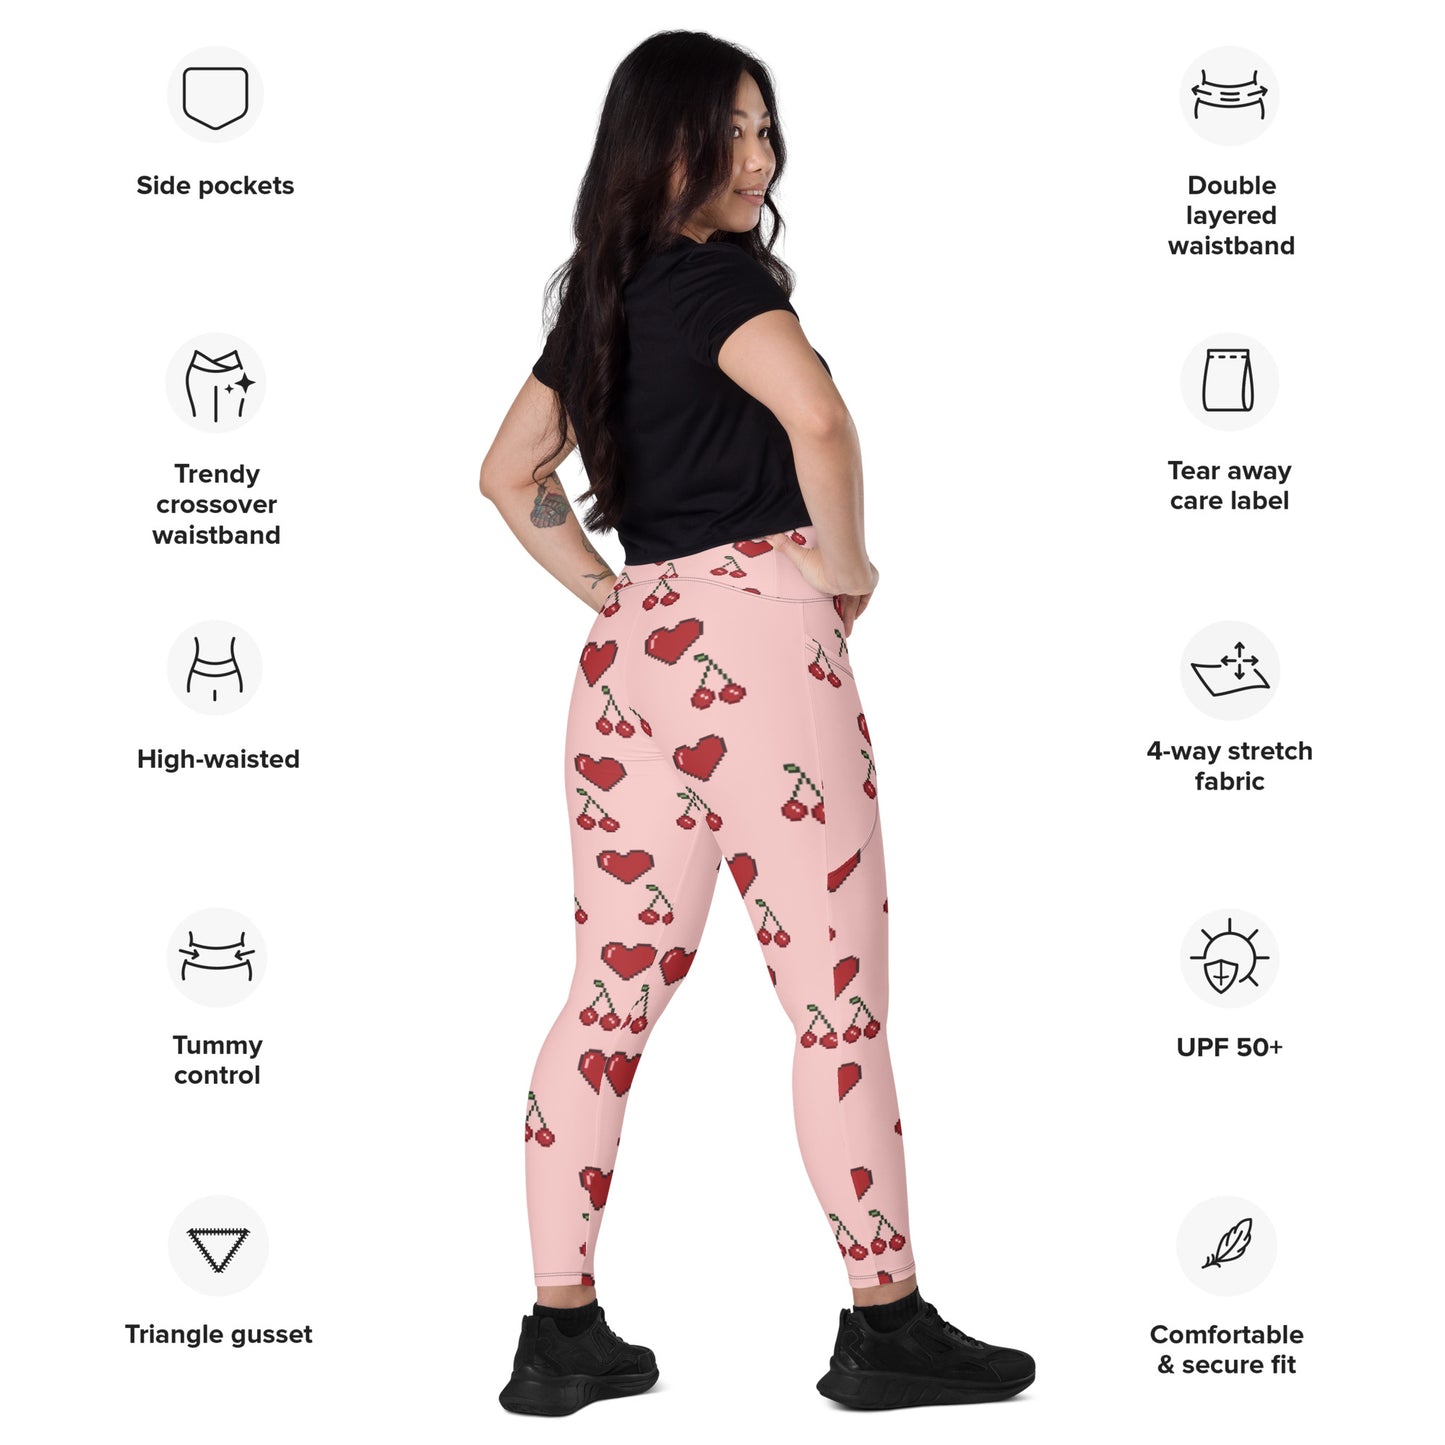 Heart Crossover leggings with pockets